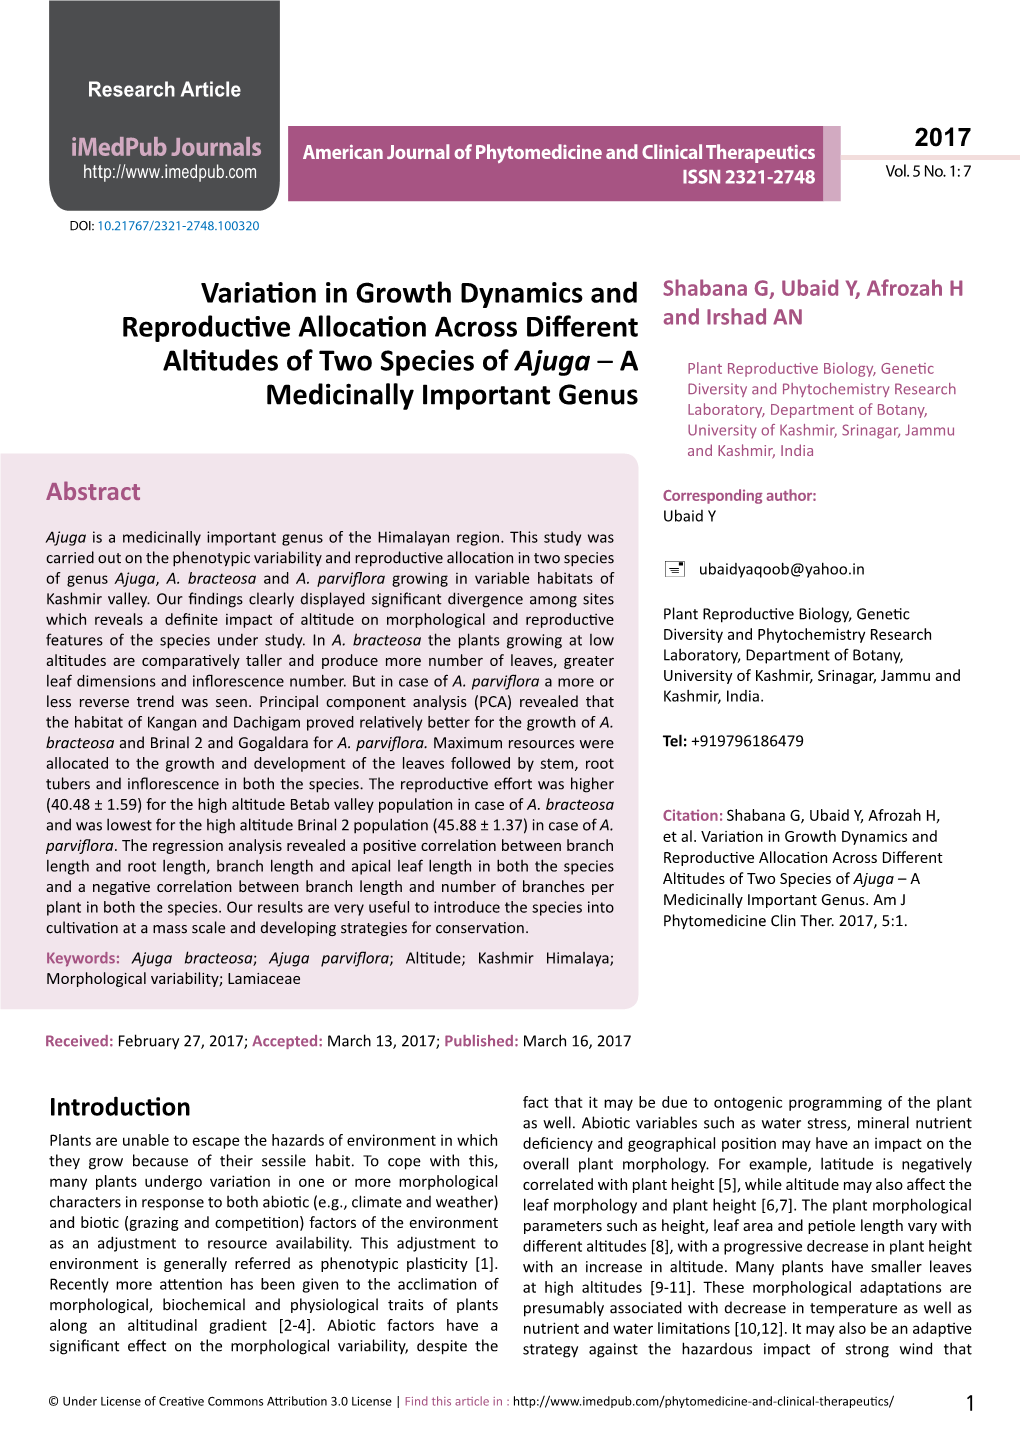 Variation in Growth Dynamics and Reproductive Allocation Across